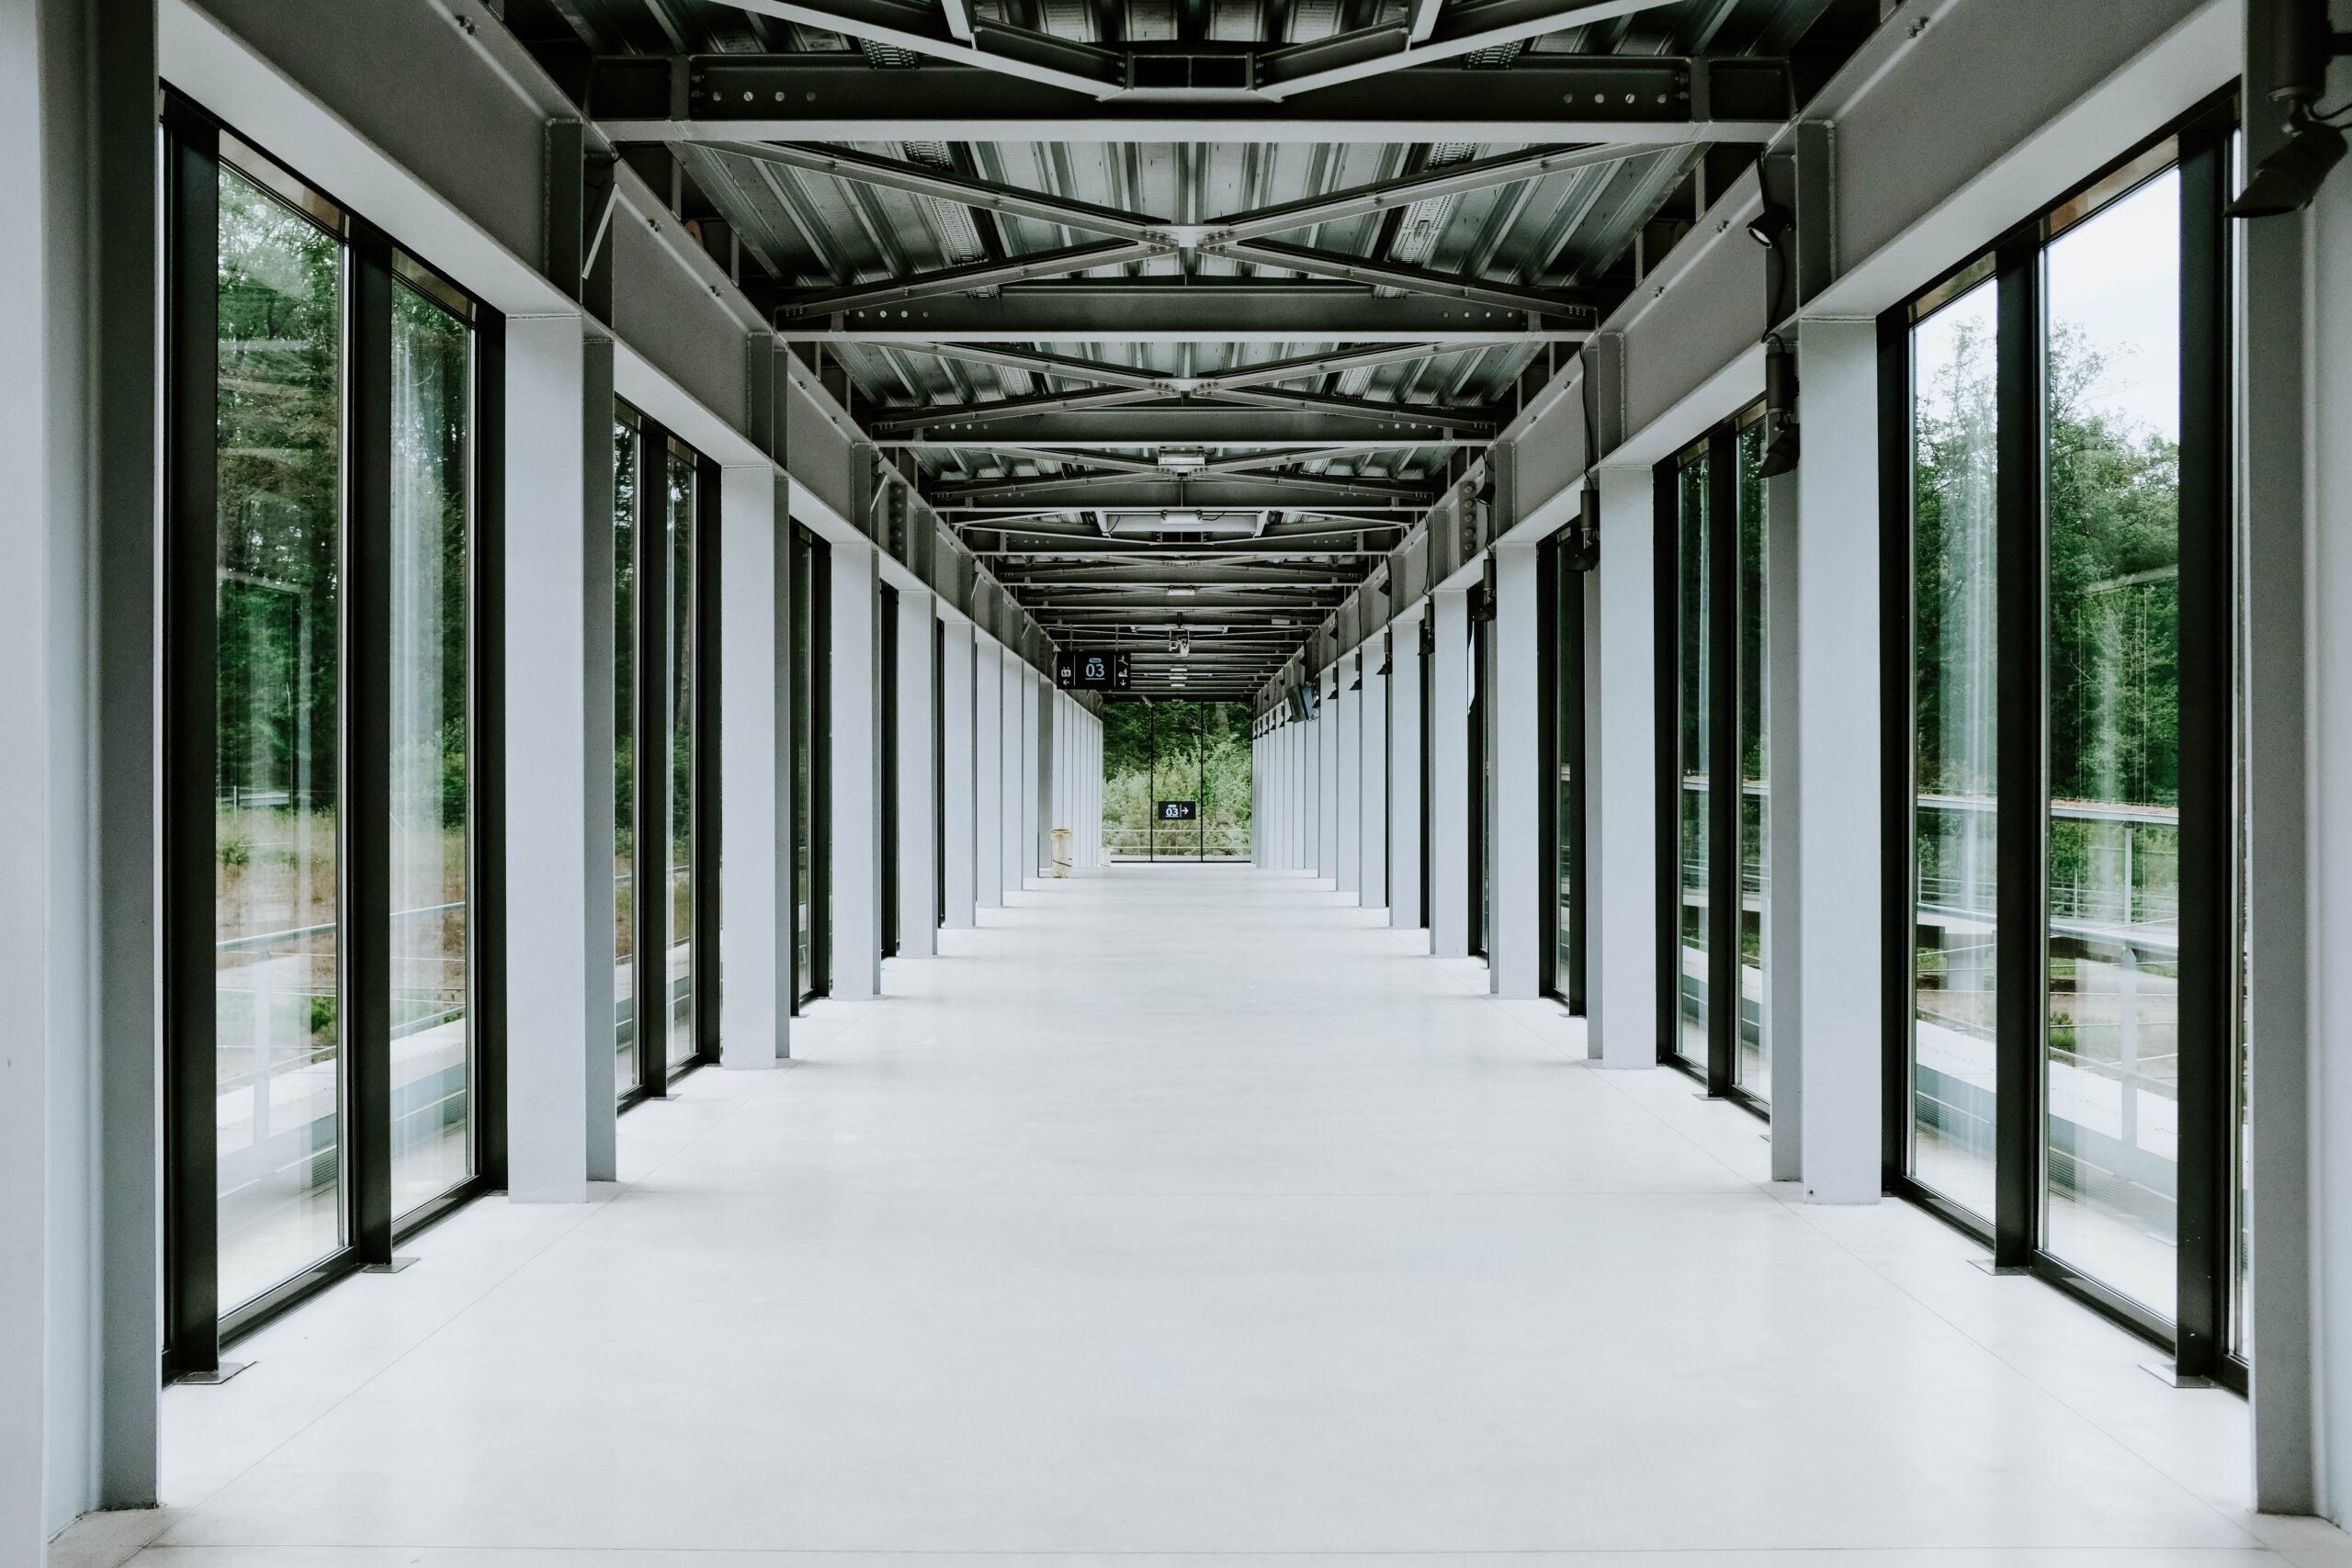 The white hallway with glass doors and metal ceiling in a modern building